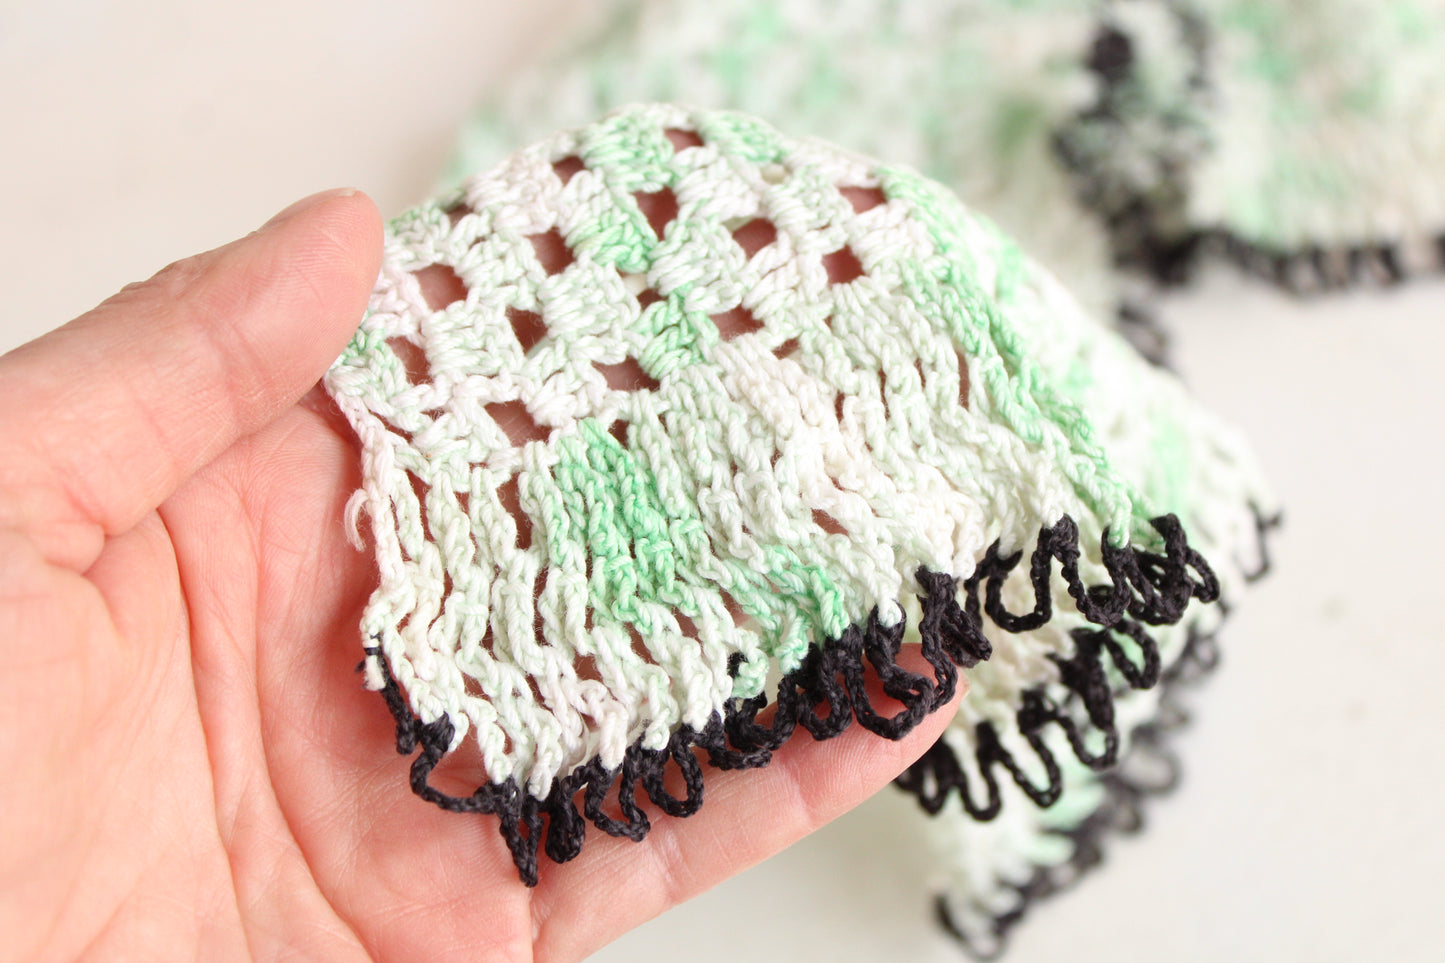 Vintage Crochet Doily in Green and White And Black